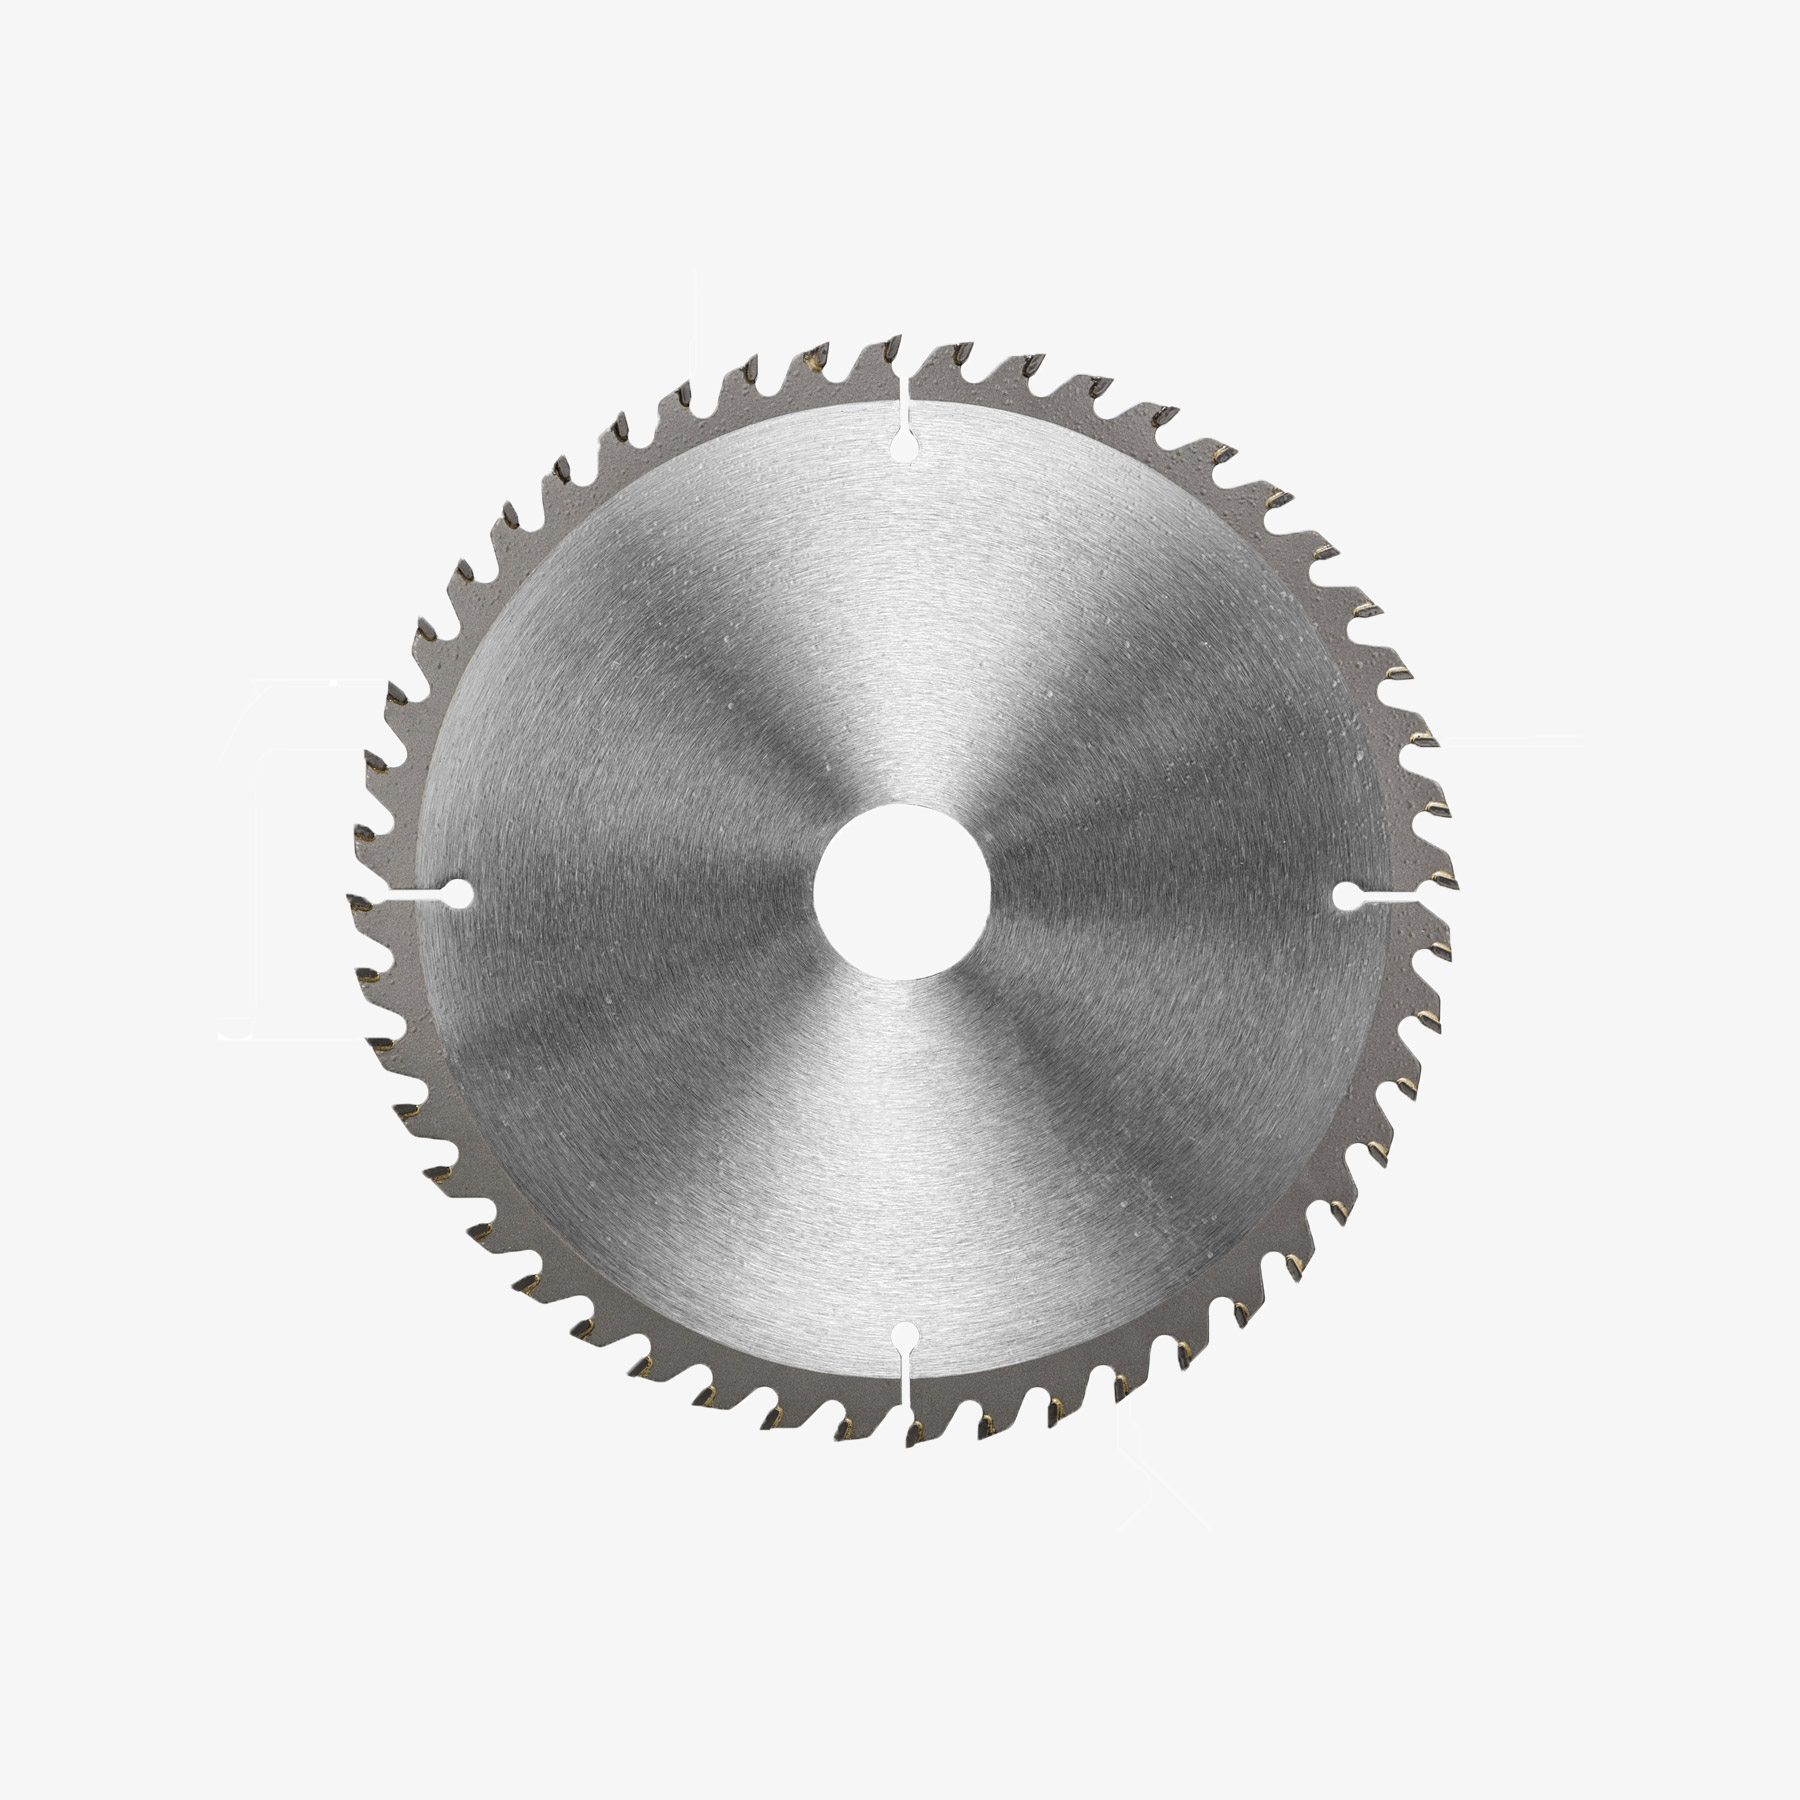 A a metal circular saw blade represents our work on Action Plastics' website and logo.